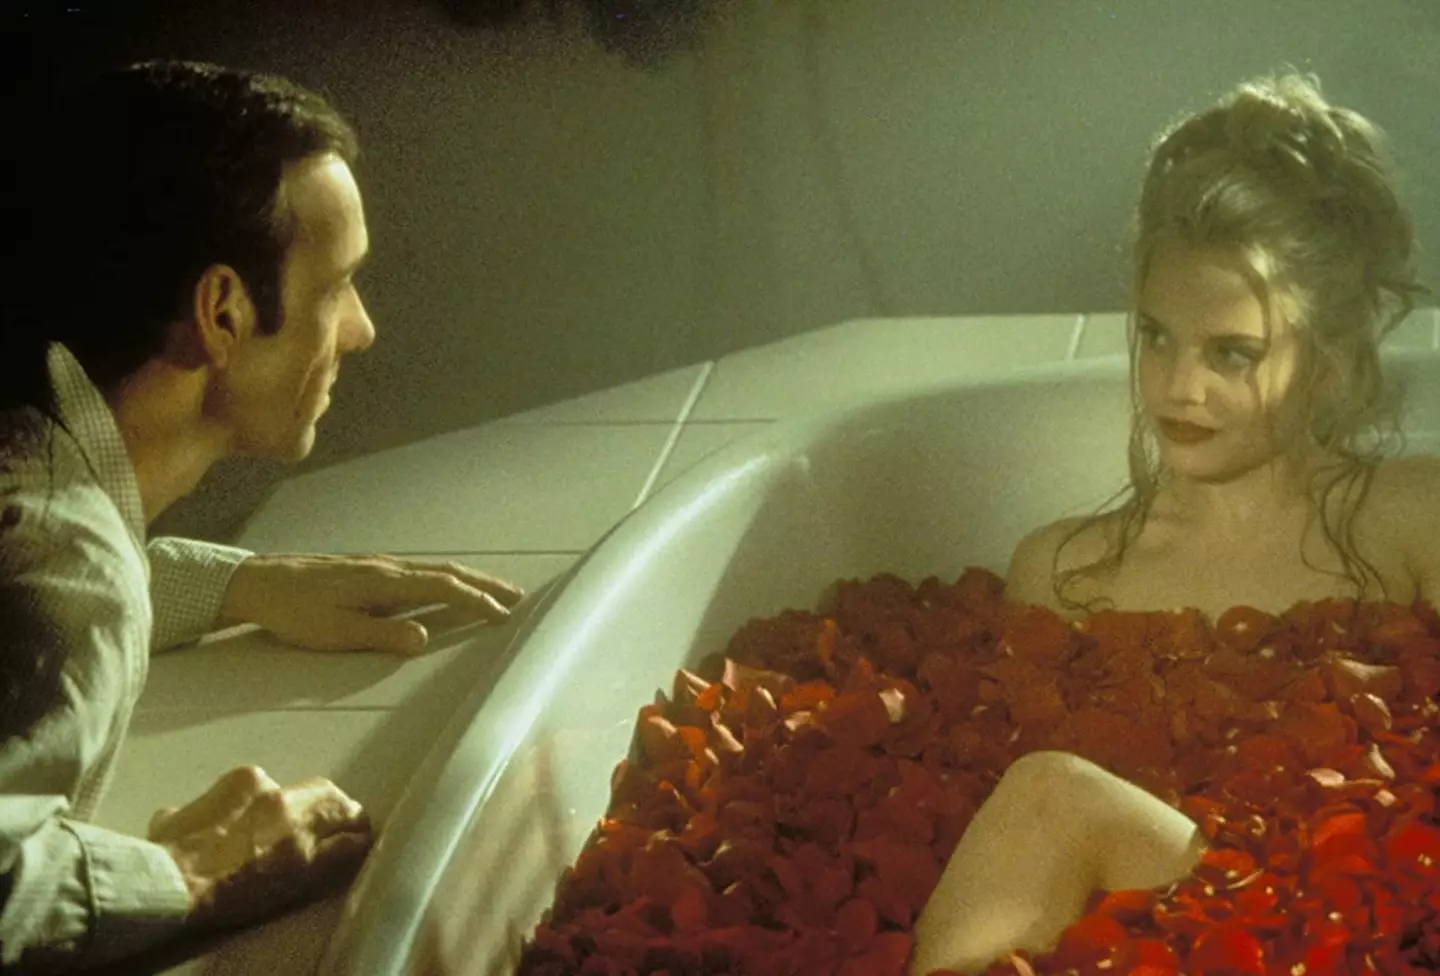 Mena Suvari revealed she 'identified' with the American Beauty character.